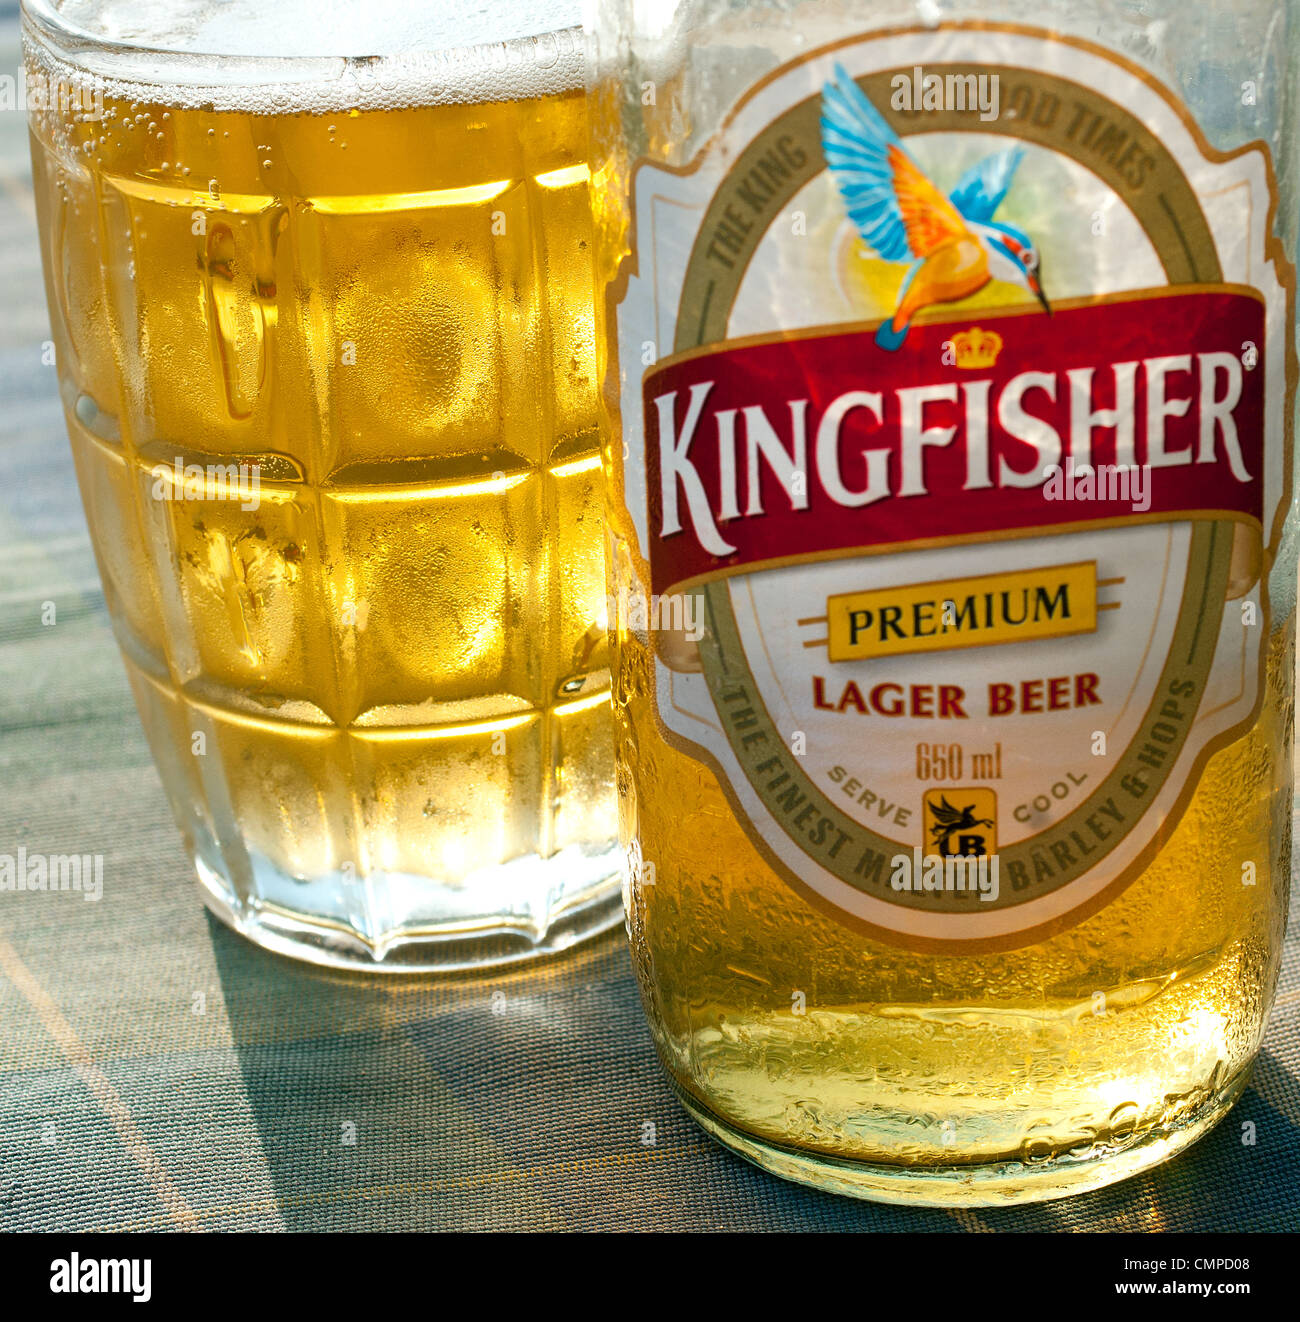 Awe-inspiring Assortment of 999+ Kingfisher Beer Pictures in Full 4K ...